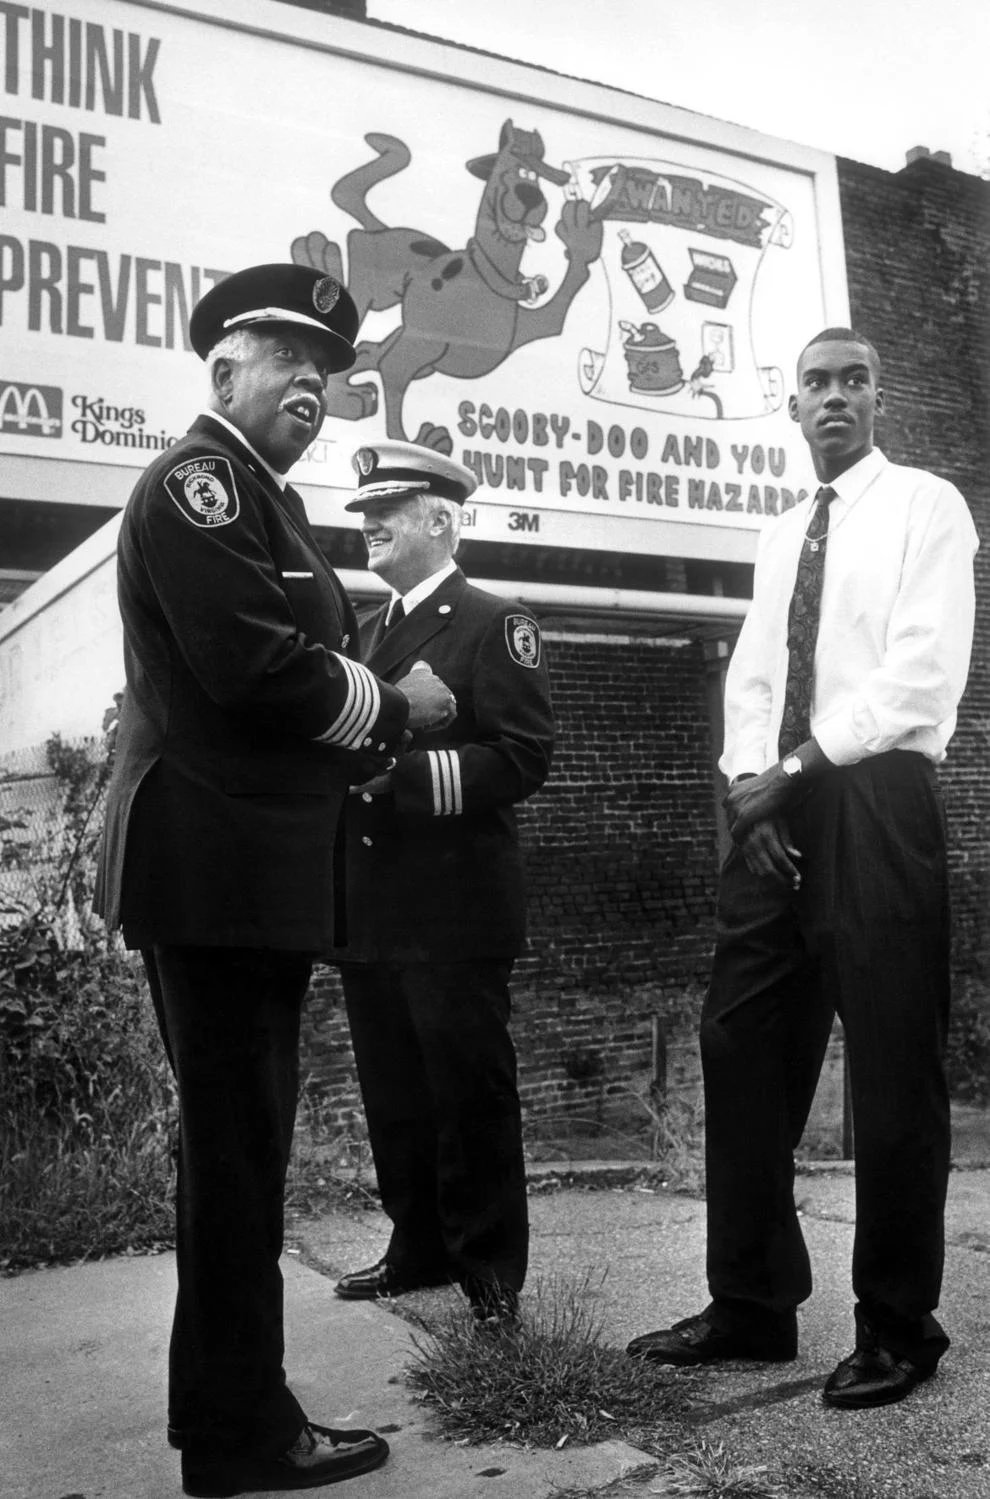 Richmond fire officials (from left) Ronald Lewis and Harold Beavers Jr. joined Robert El stood in front of a billboard El designed, 1990